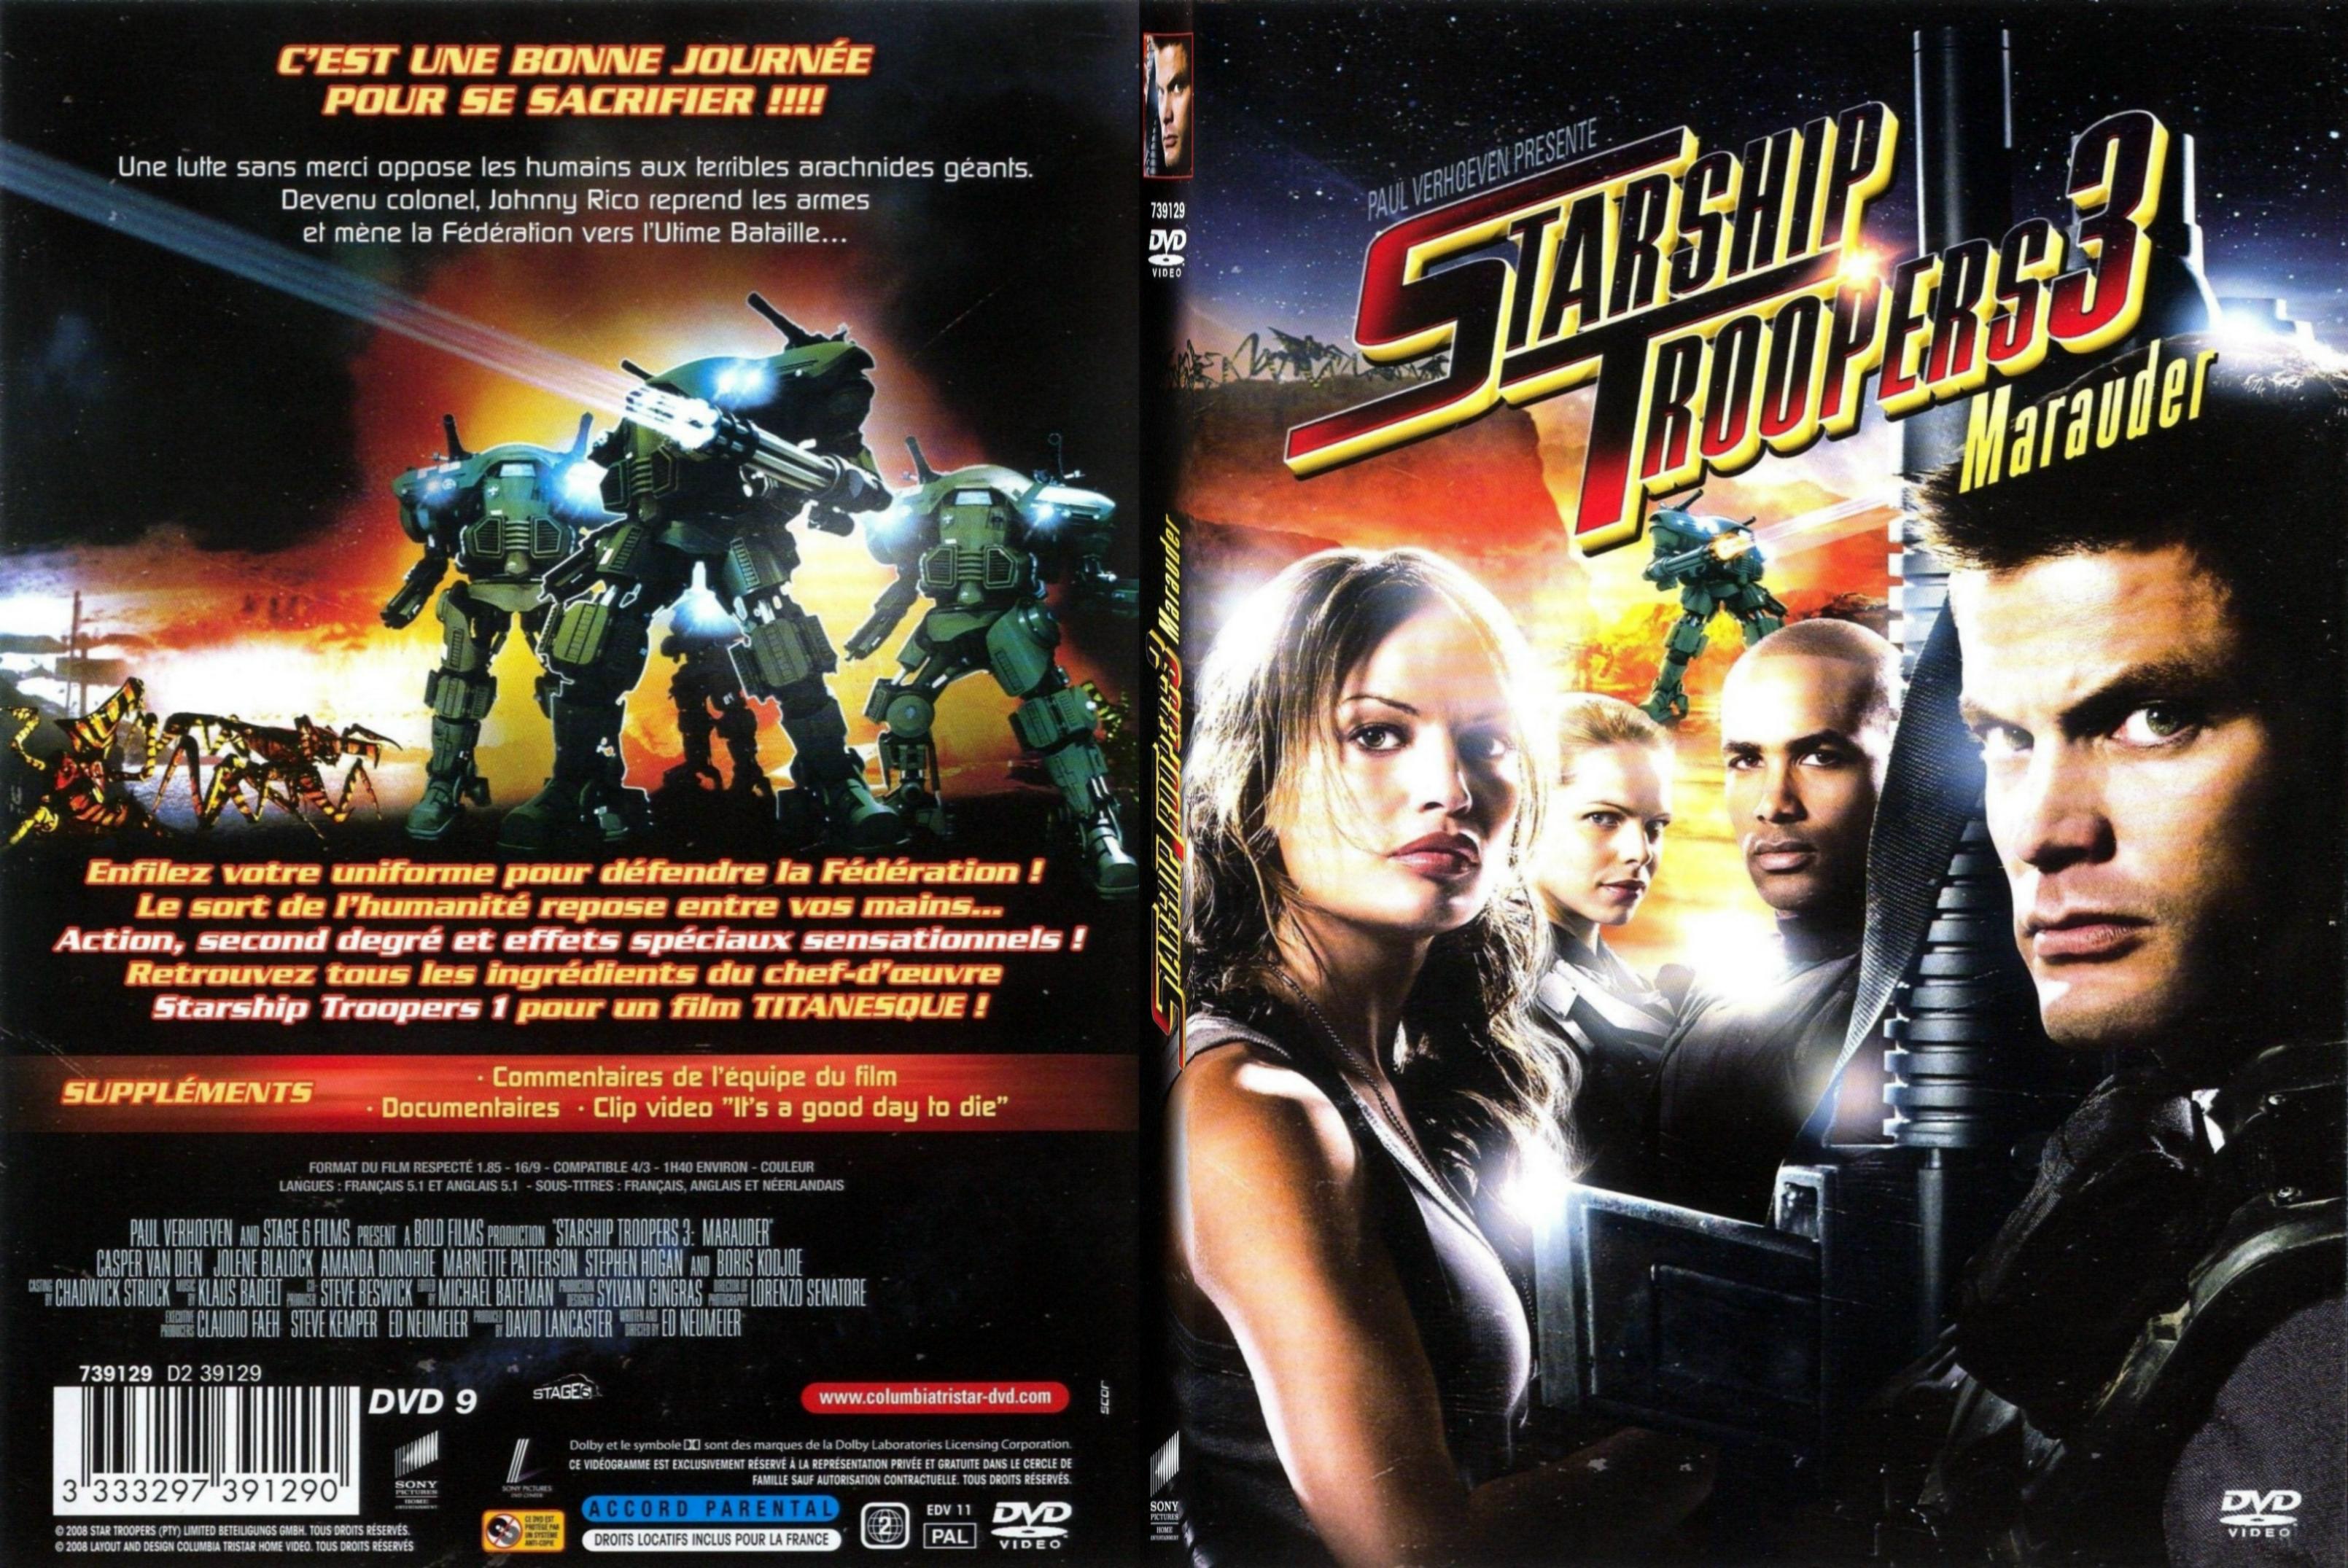 Jaquette DVD Starship troopers 3 - SLIM